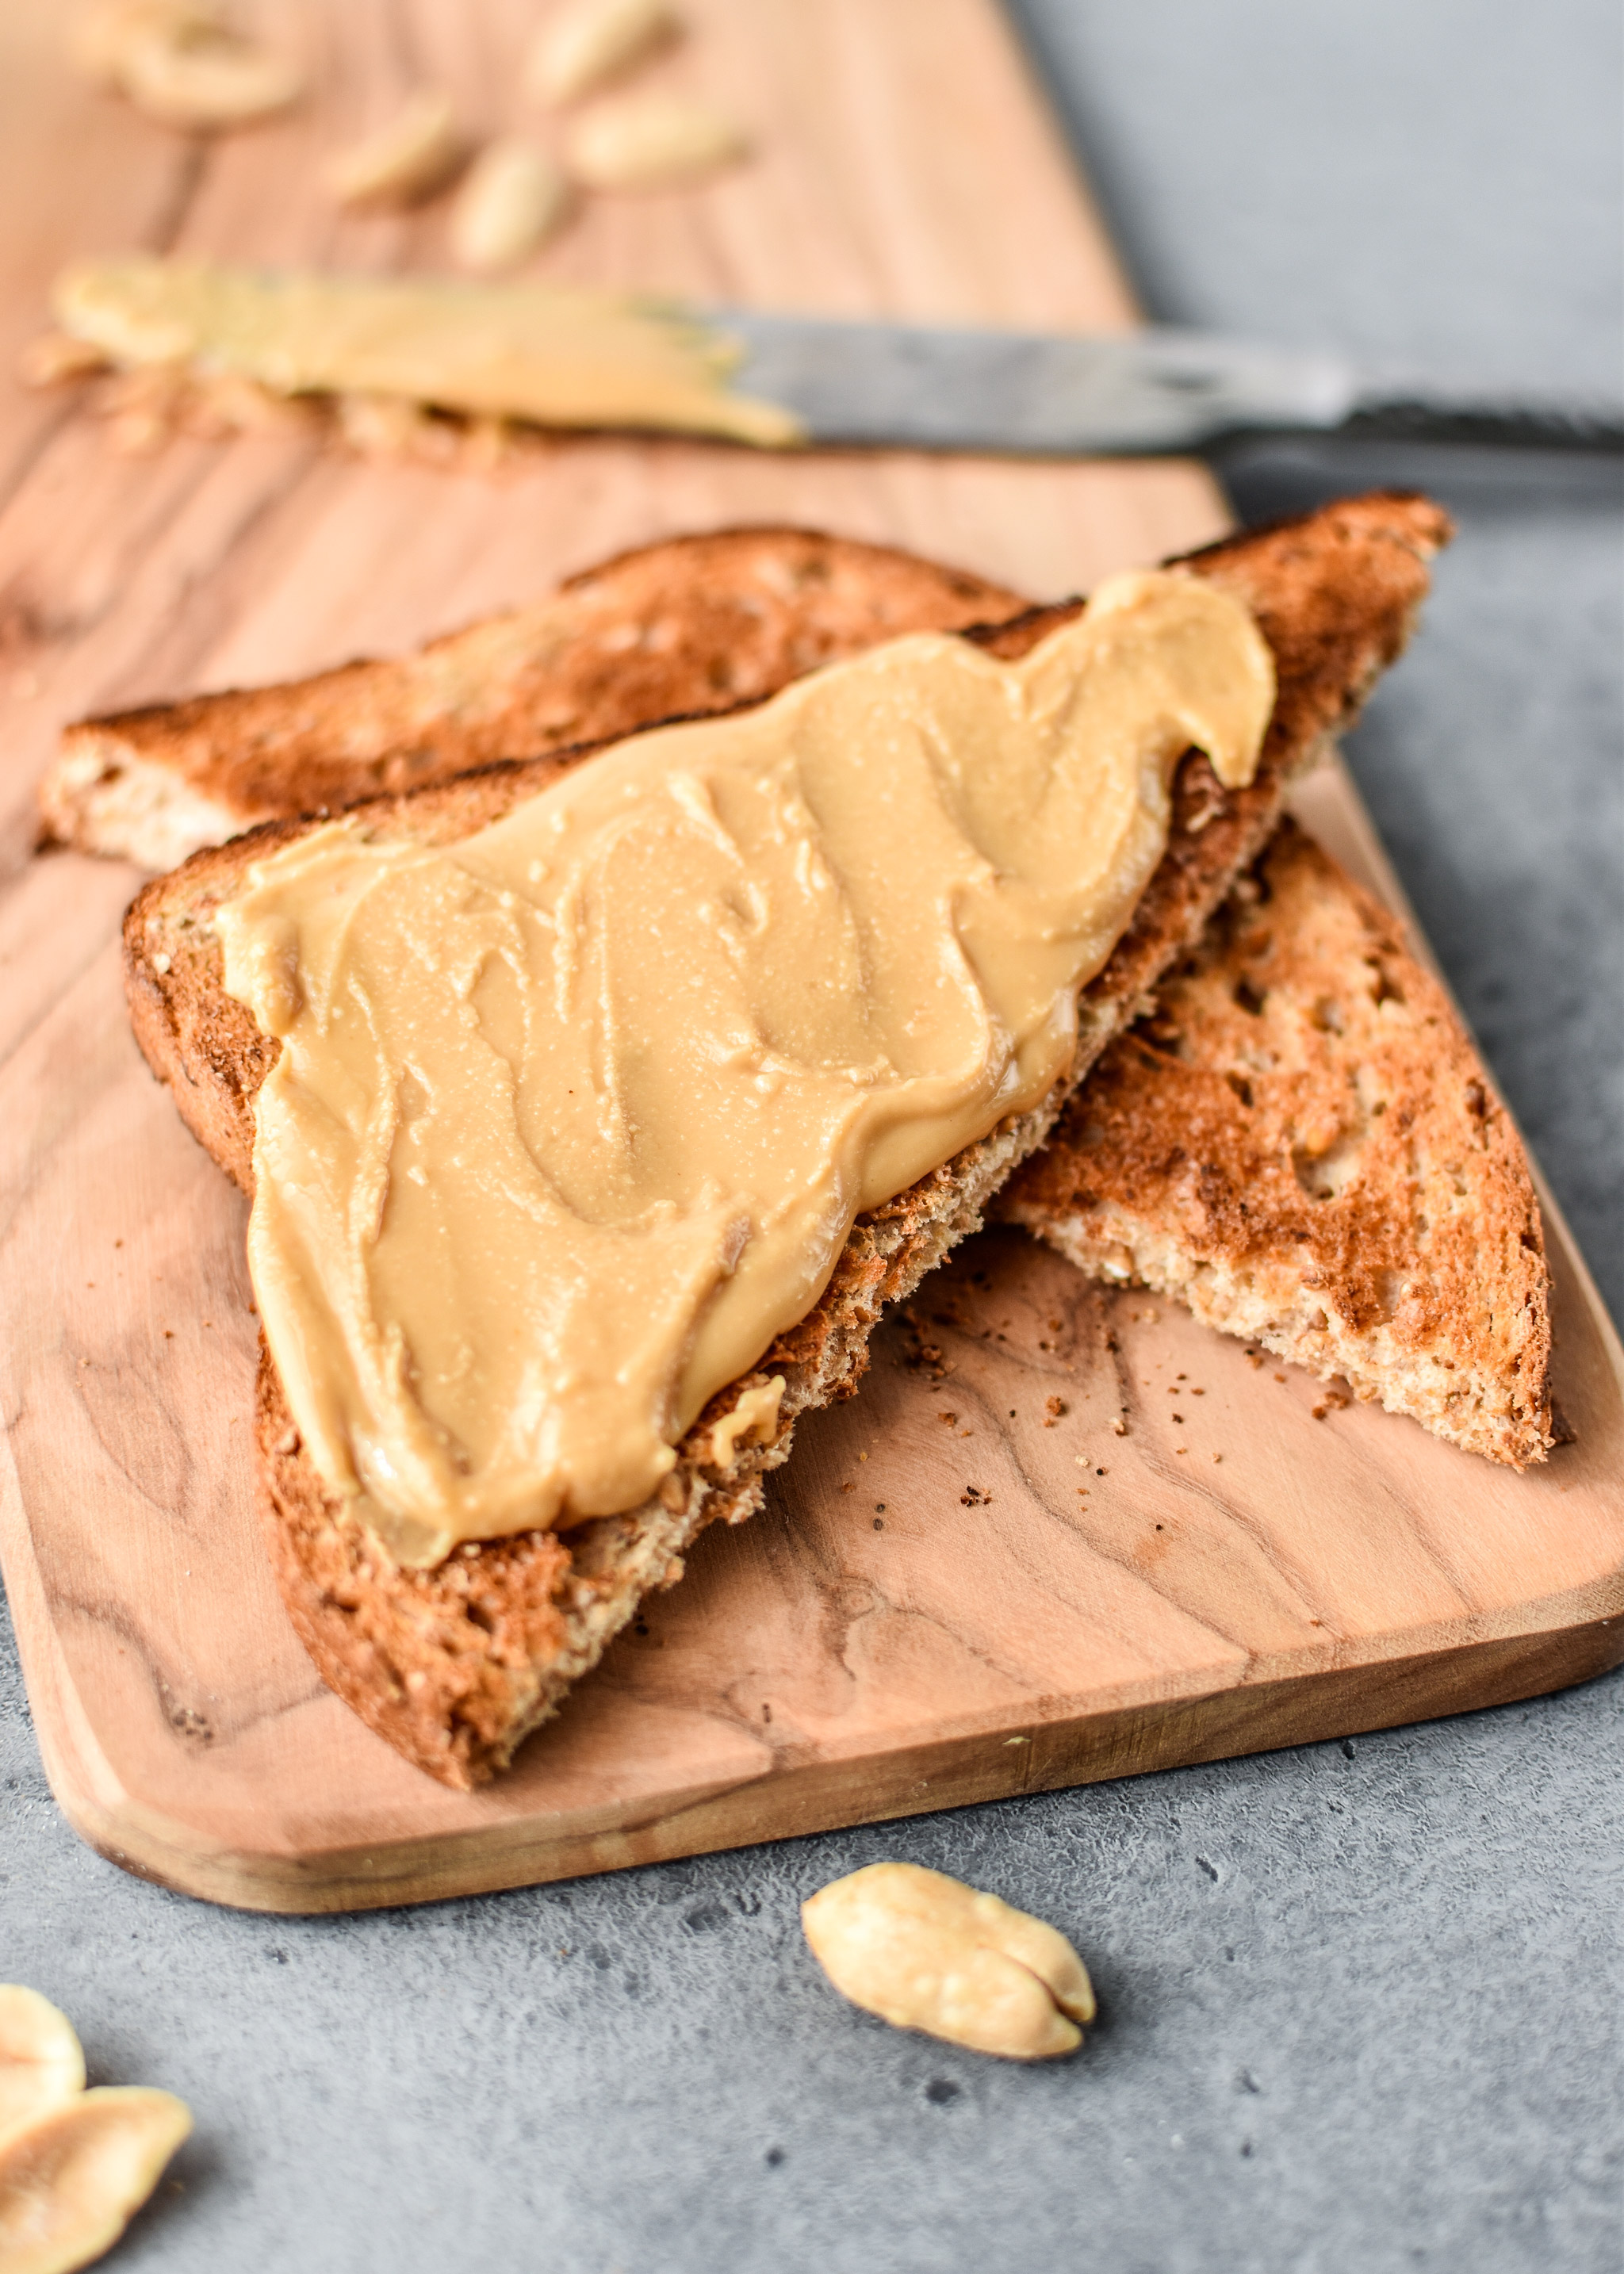 Homemade peanut butter on toast. Store bought vs Homemade Peanut Butter: Which is Cheaper?